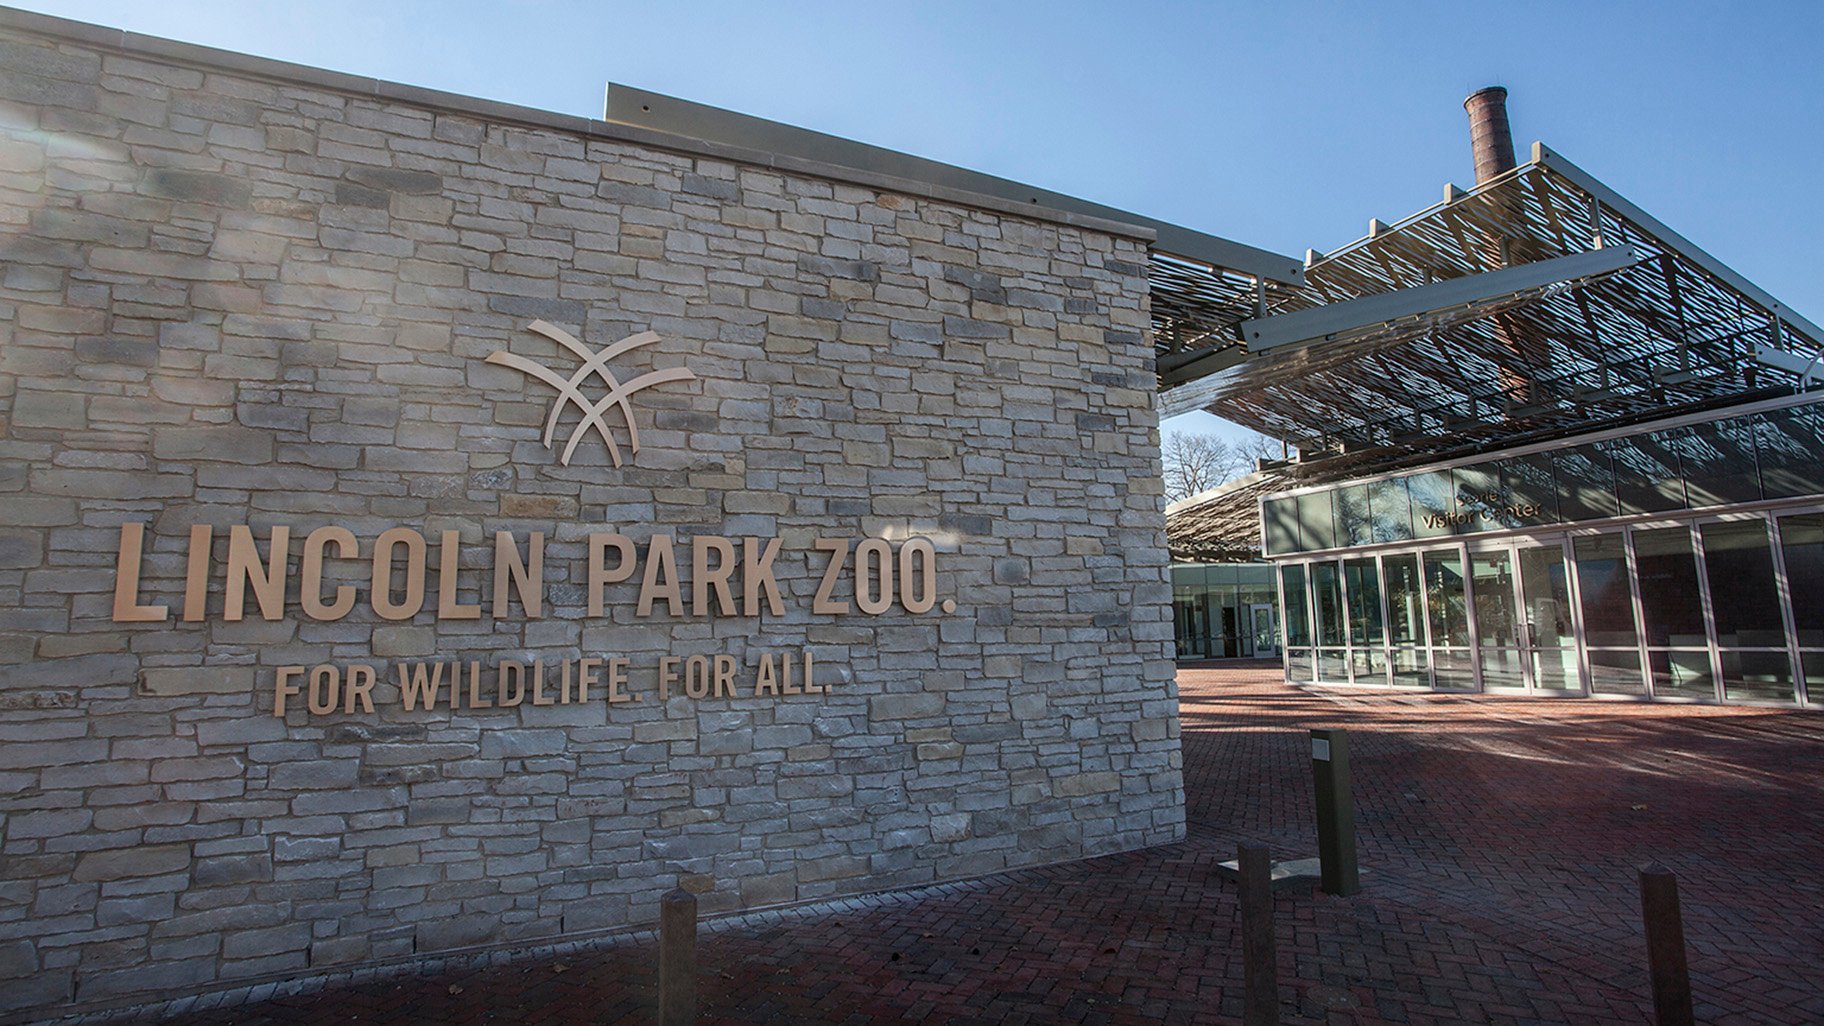 Lincoln Park Zoo to Remain Free Through at Least 2050, Chicago News